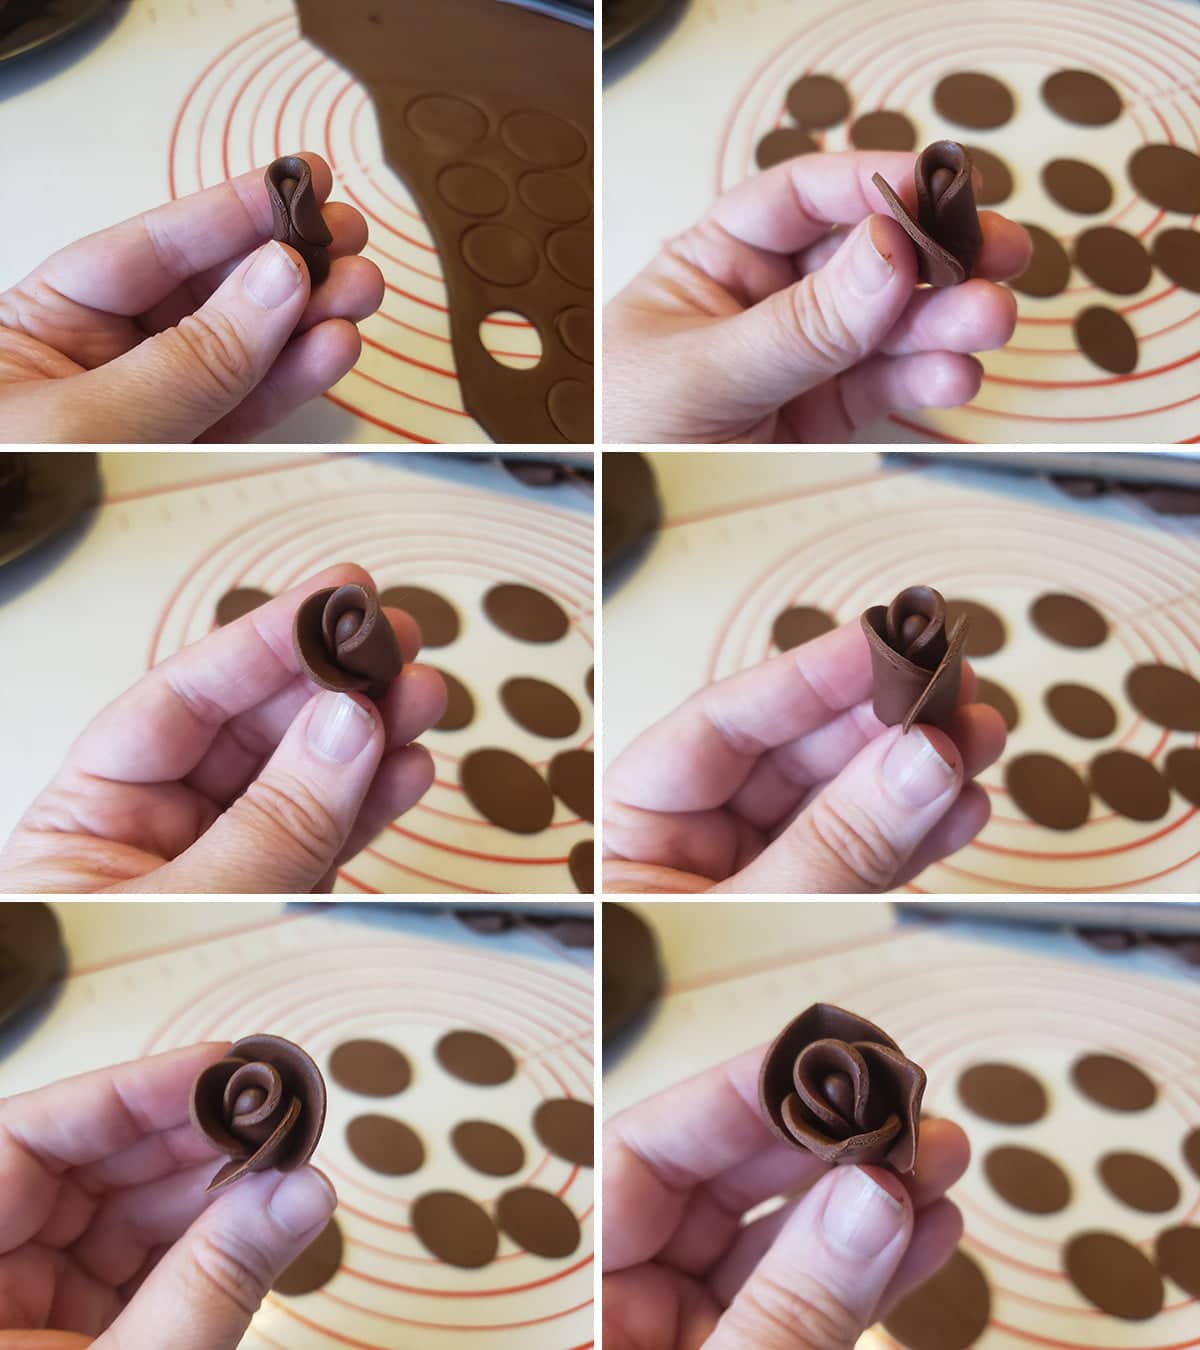 A 6 part compilation image showing the first few steps of creating a chocolate fondant rose.